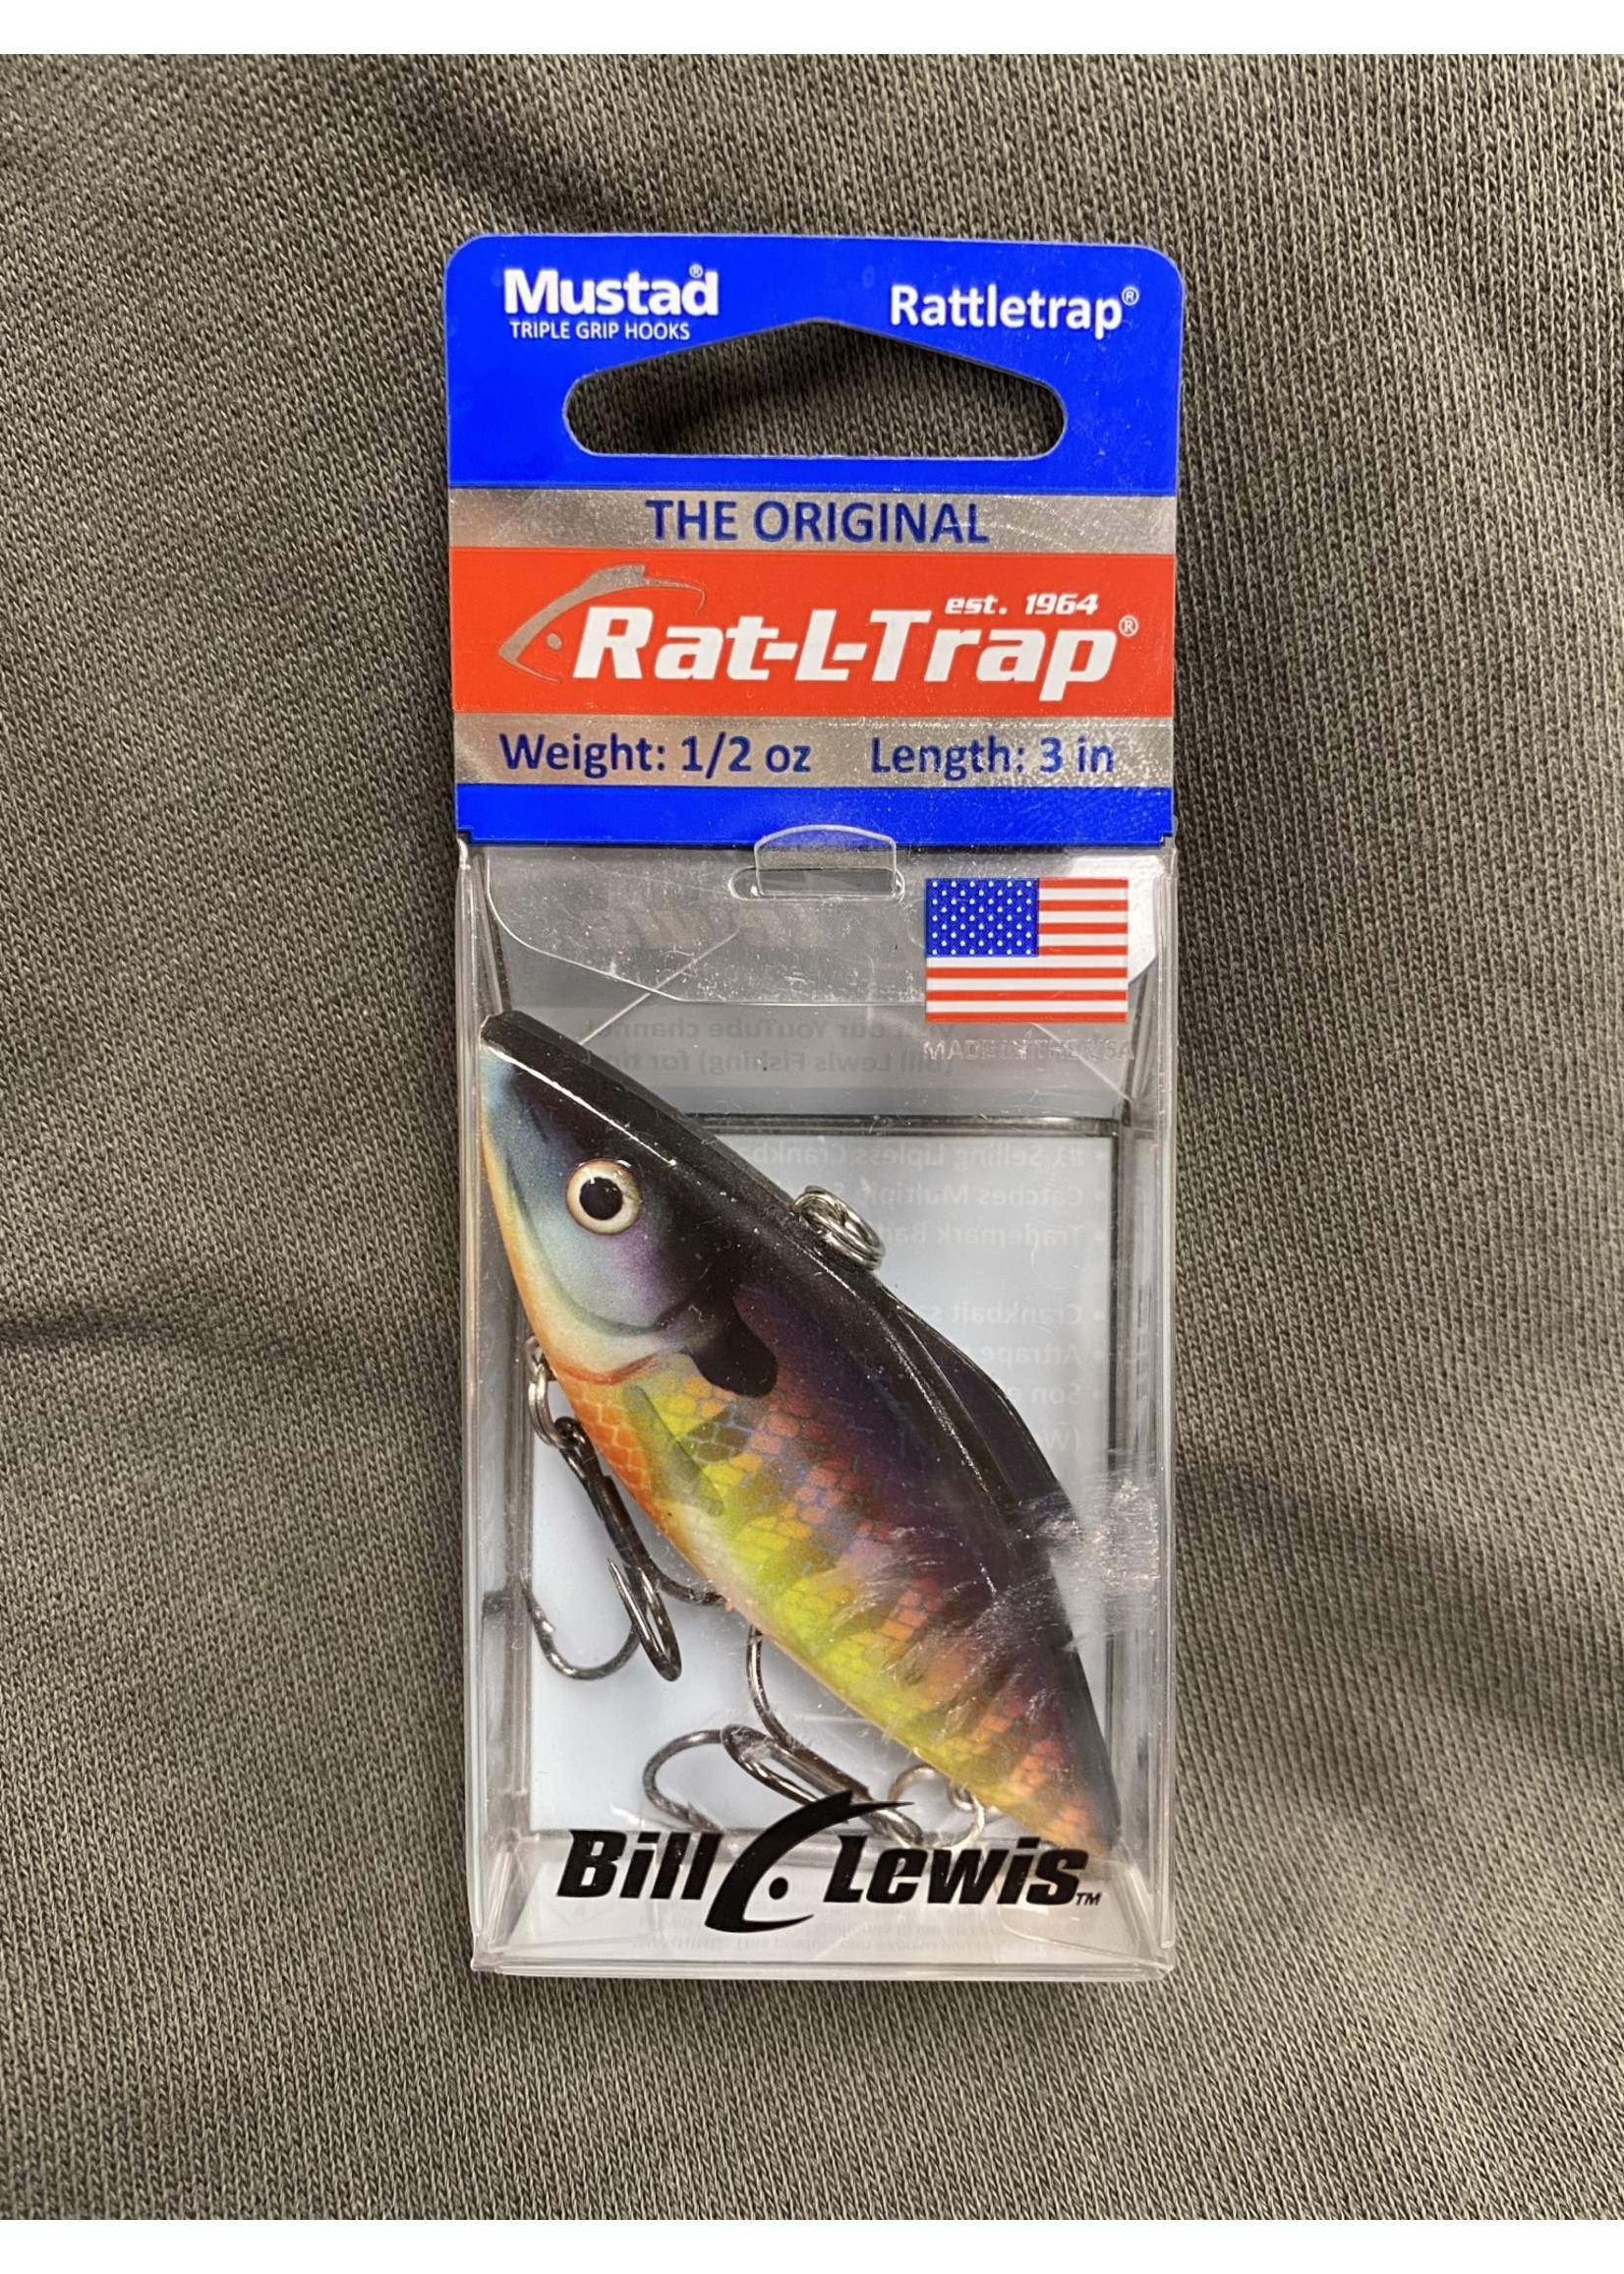 BILL LEWIS BILL LEWIS RAT-L-TRAP - Rugged Shoal Outfitters